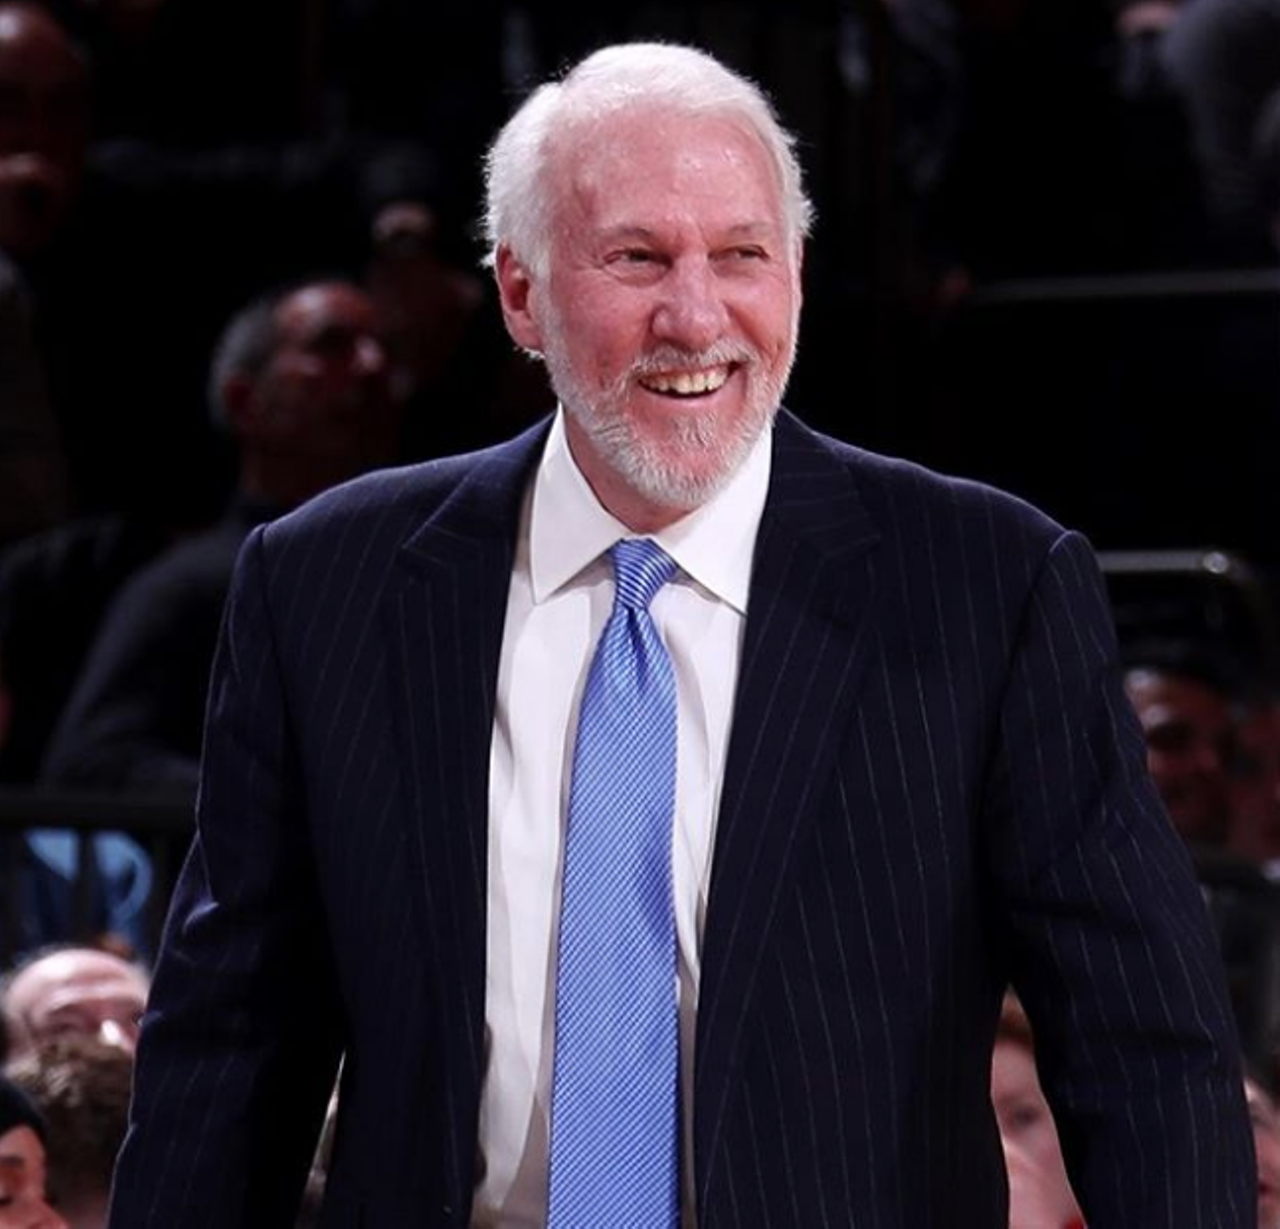 Gregg Popovich
While the look is up to you, the fun of dressing up as Coach Pop comes in getting into character. Be a man of few words, be sassy with folks up in your face, here’s your time to be a really jerk, but one that’s well-loved and respected as hell.
Photo via Instagram / spurs